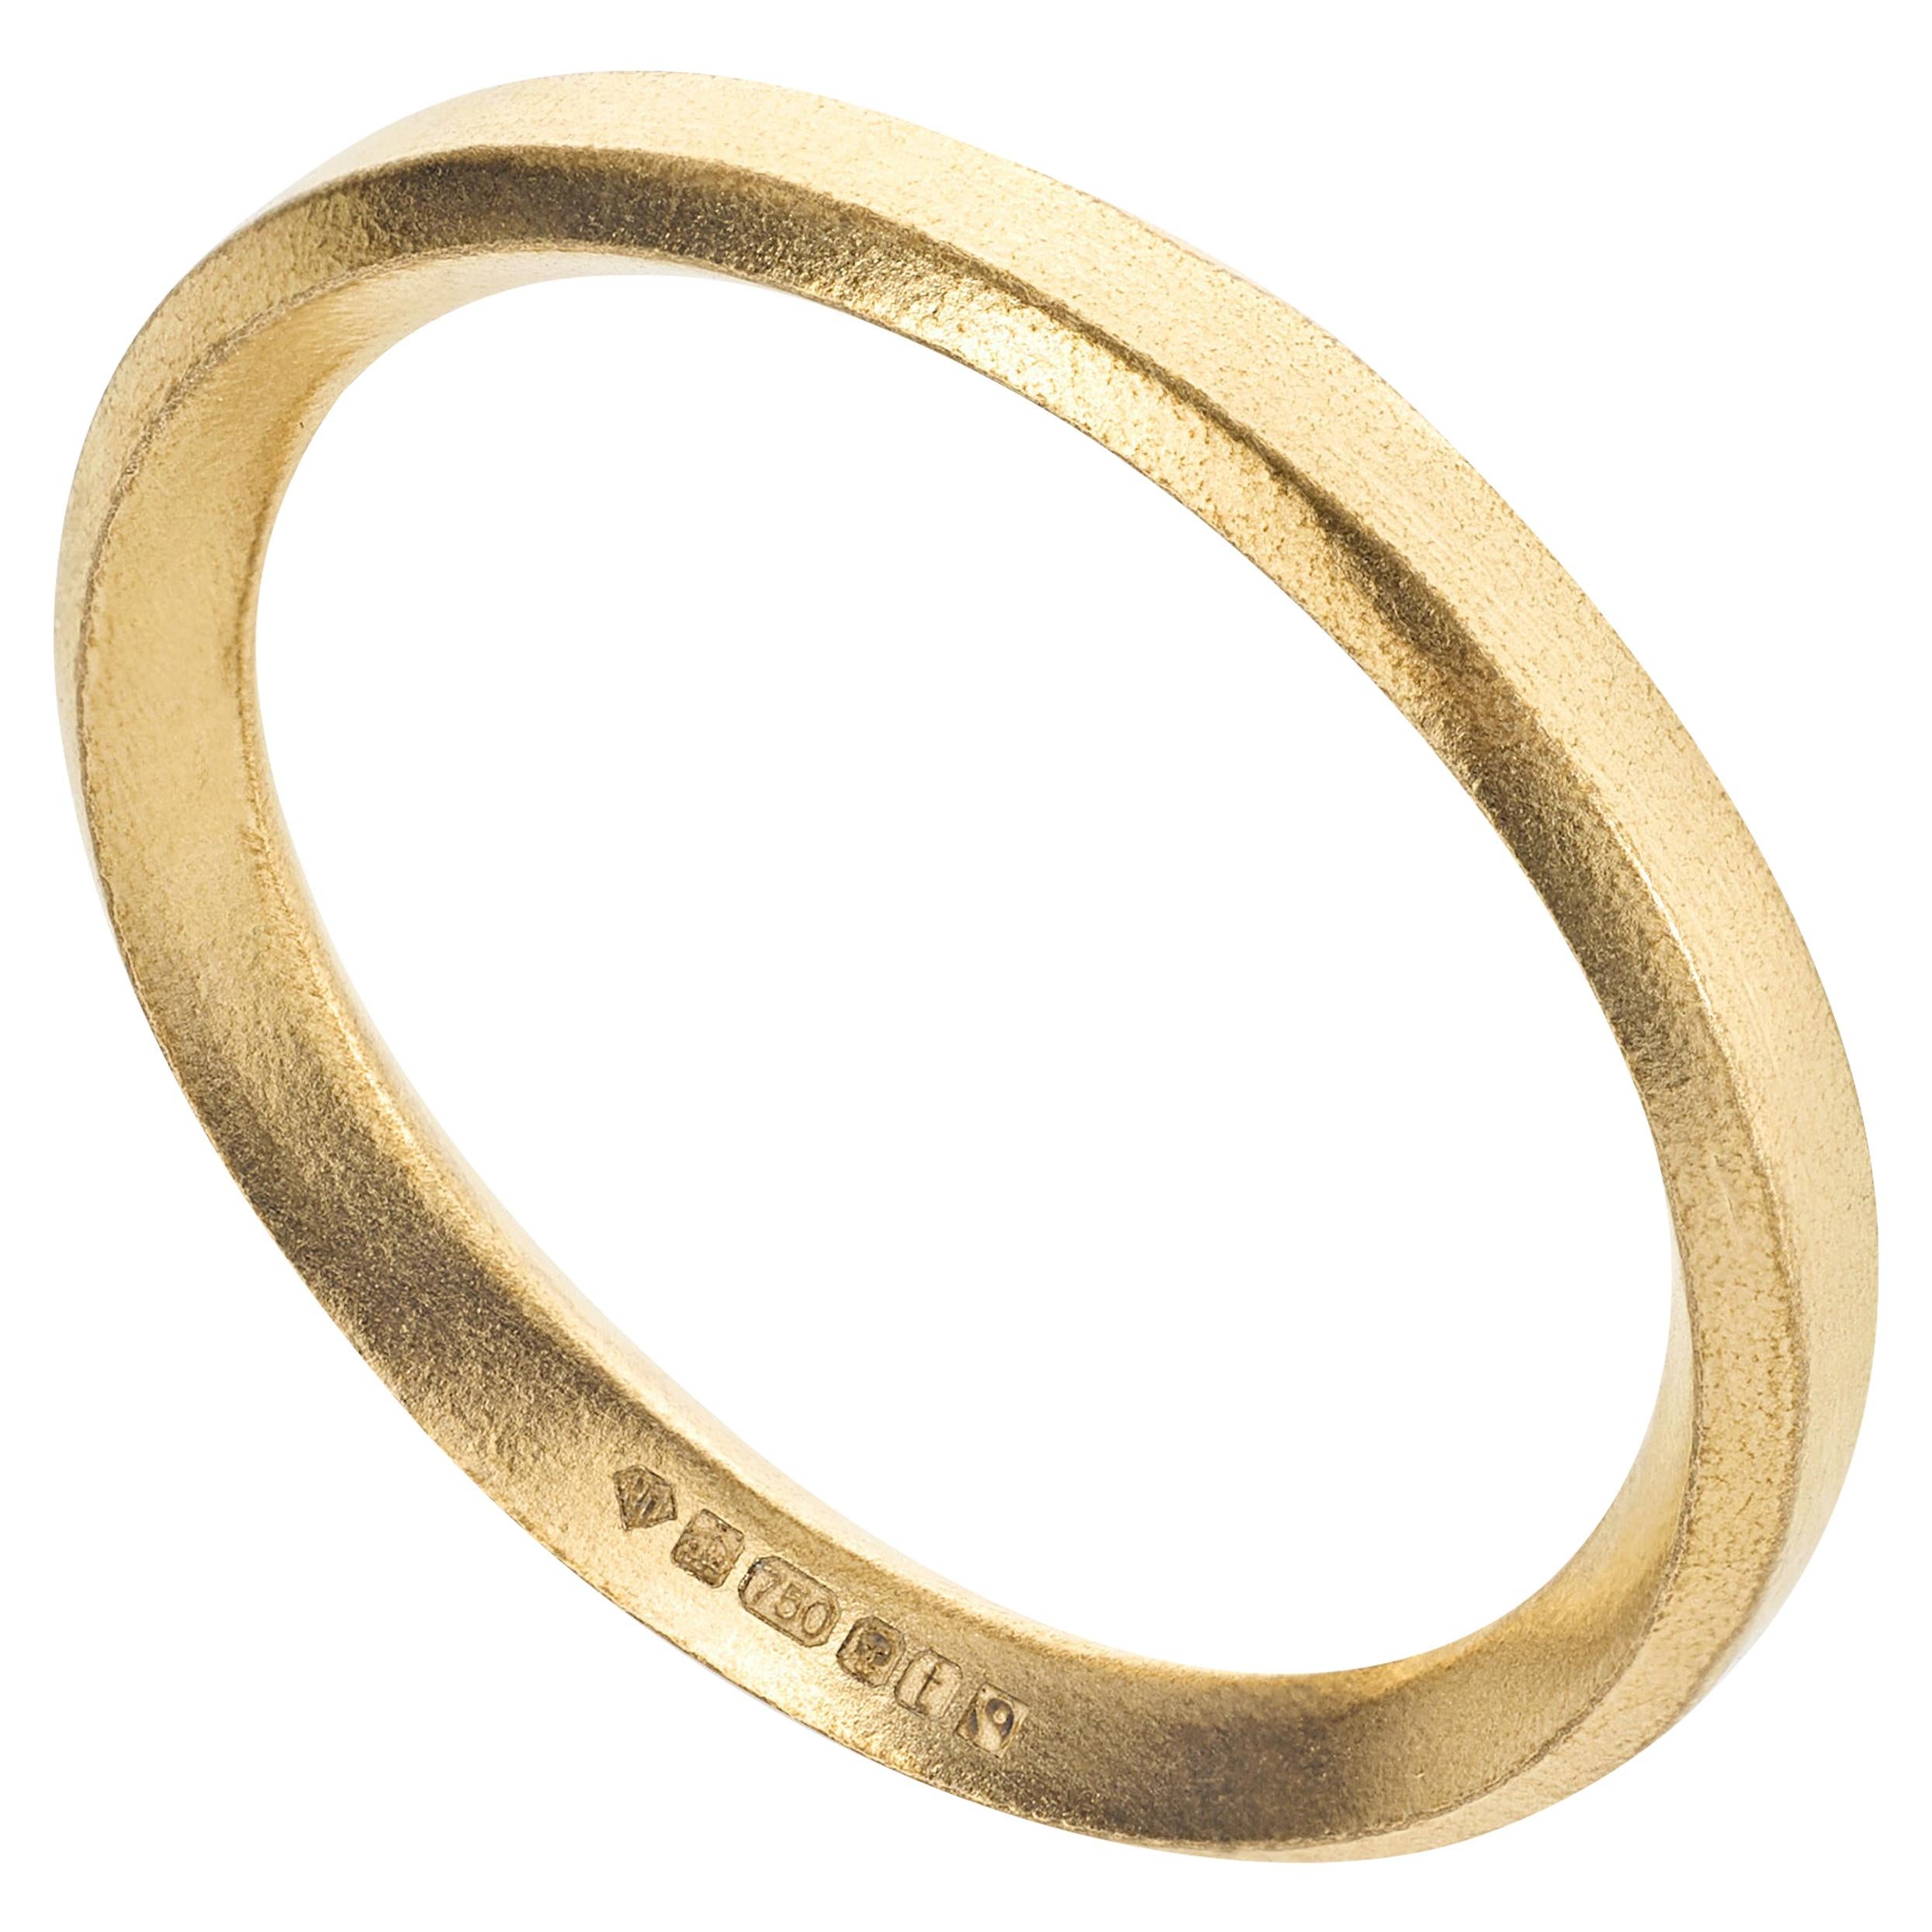 The Rock Hound Profile Ring in 18 Carat Yellow Fairtrade Gold